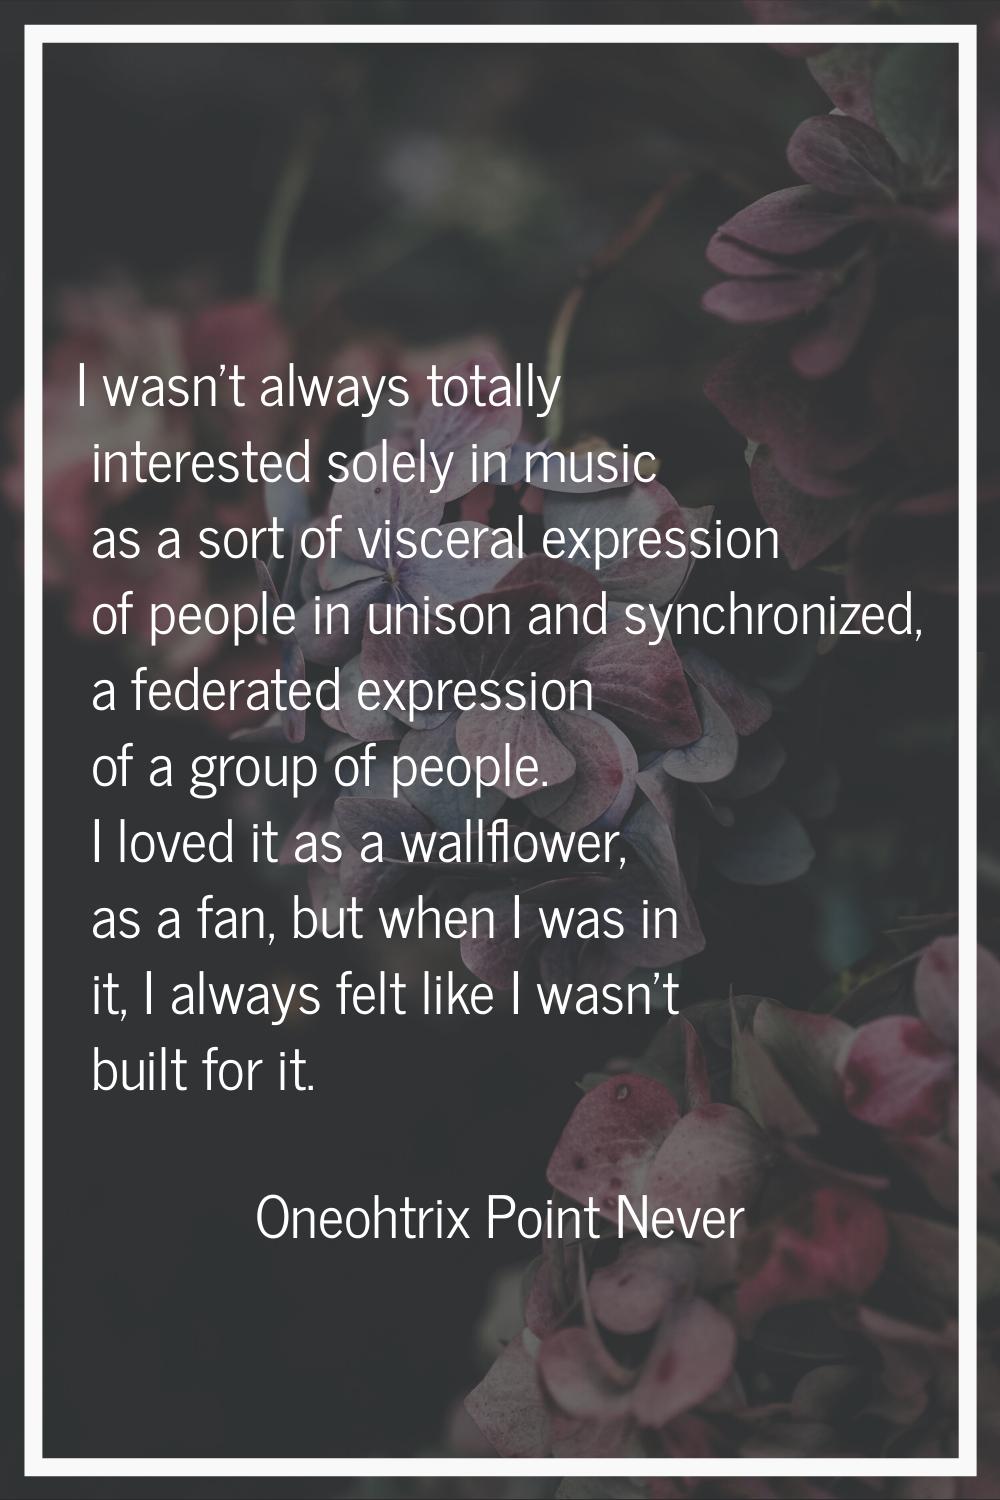 I wasn't always totally interested solely in music as a sort of visceral expression of people in un